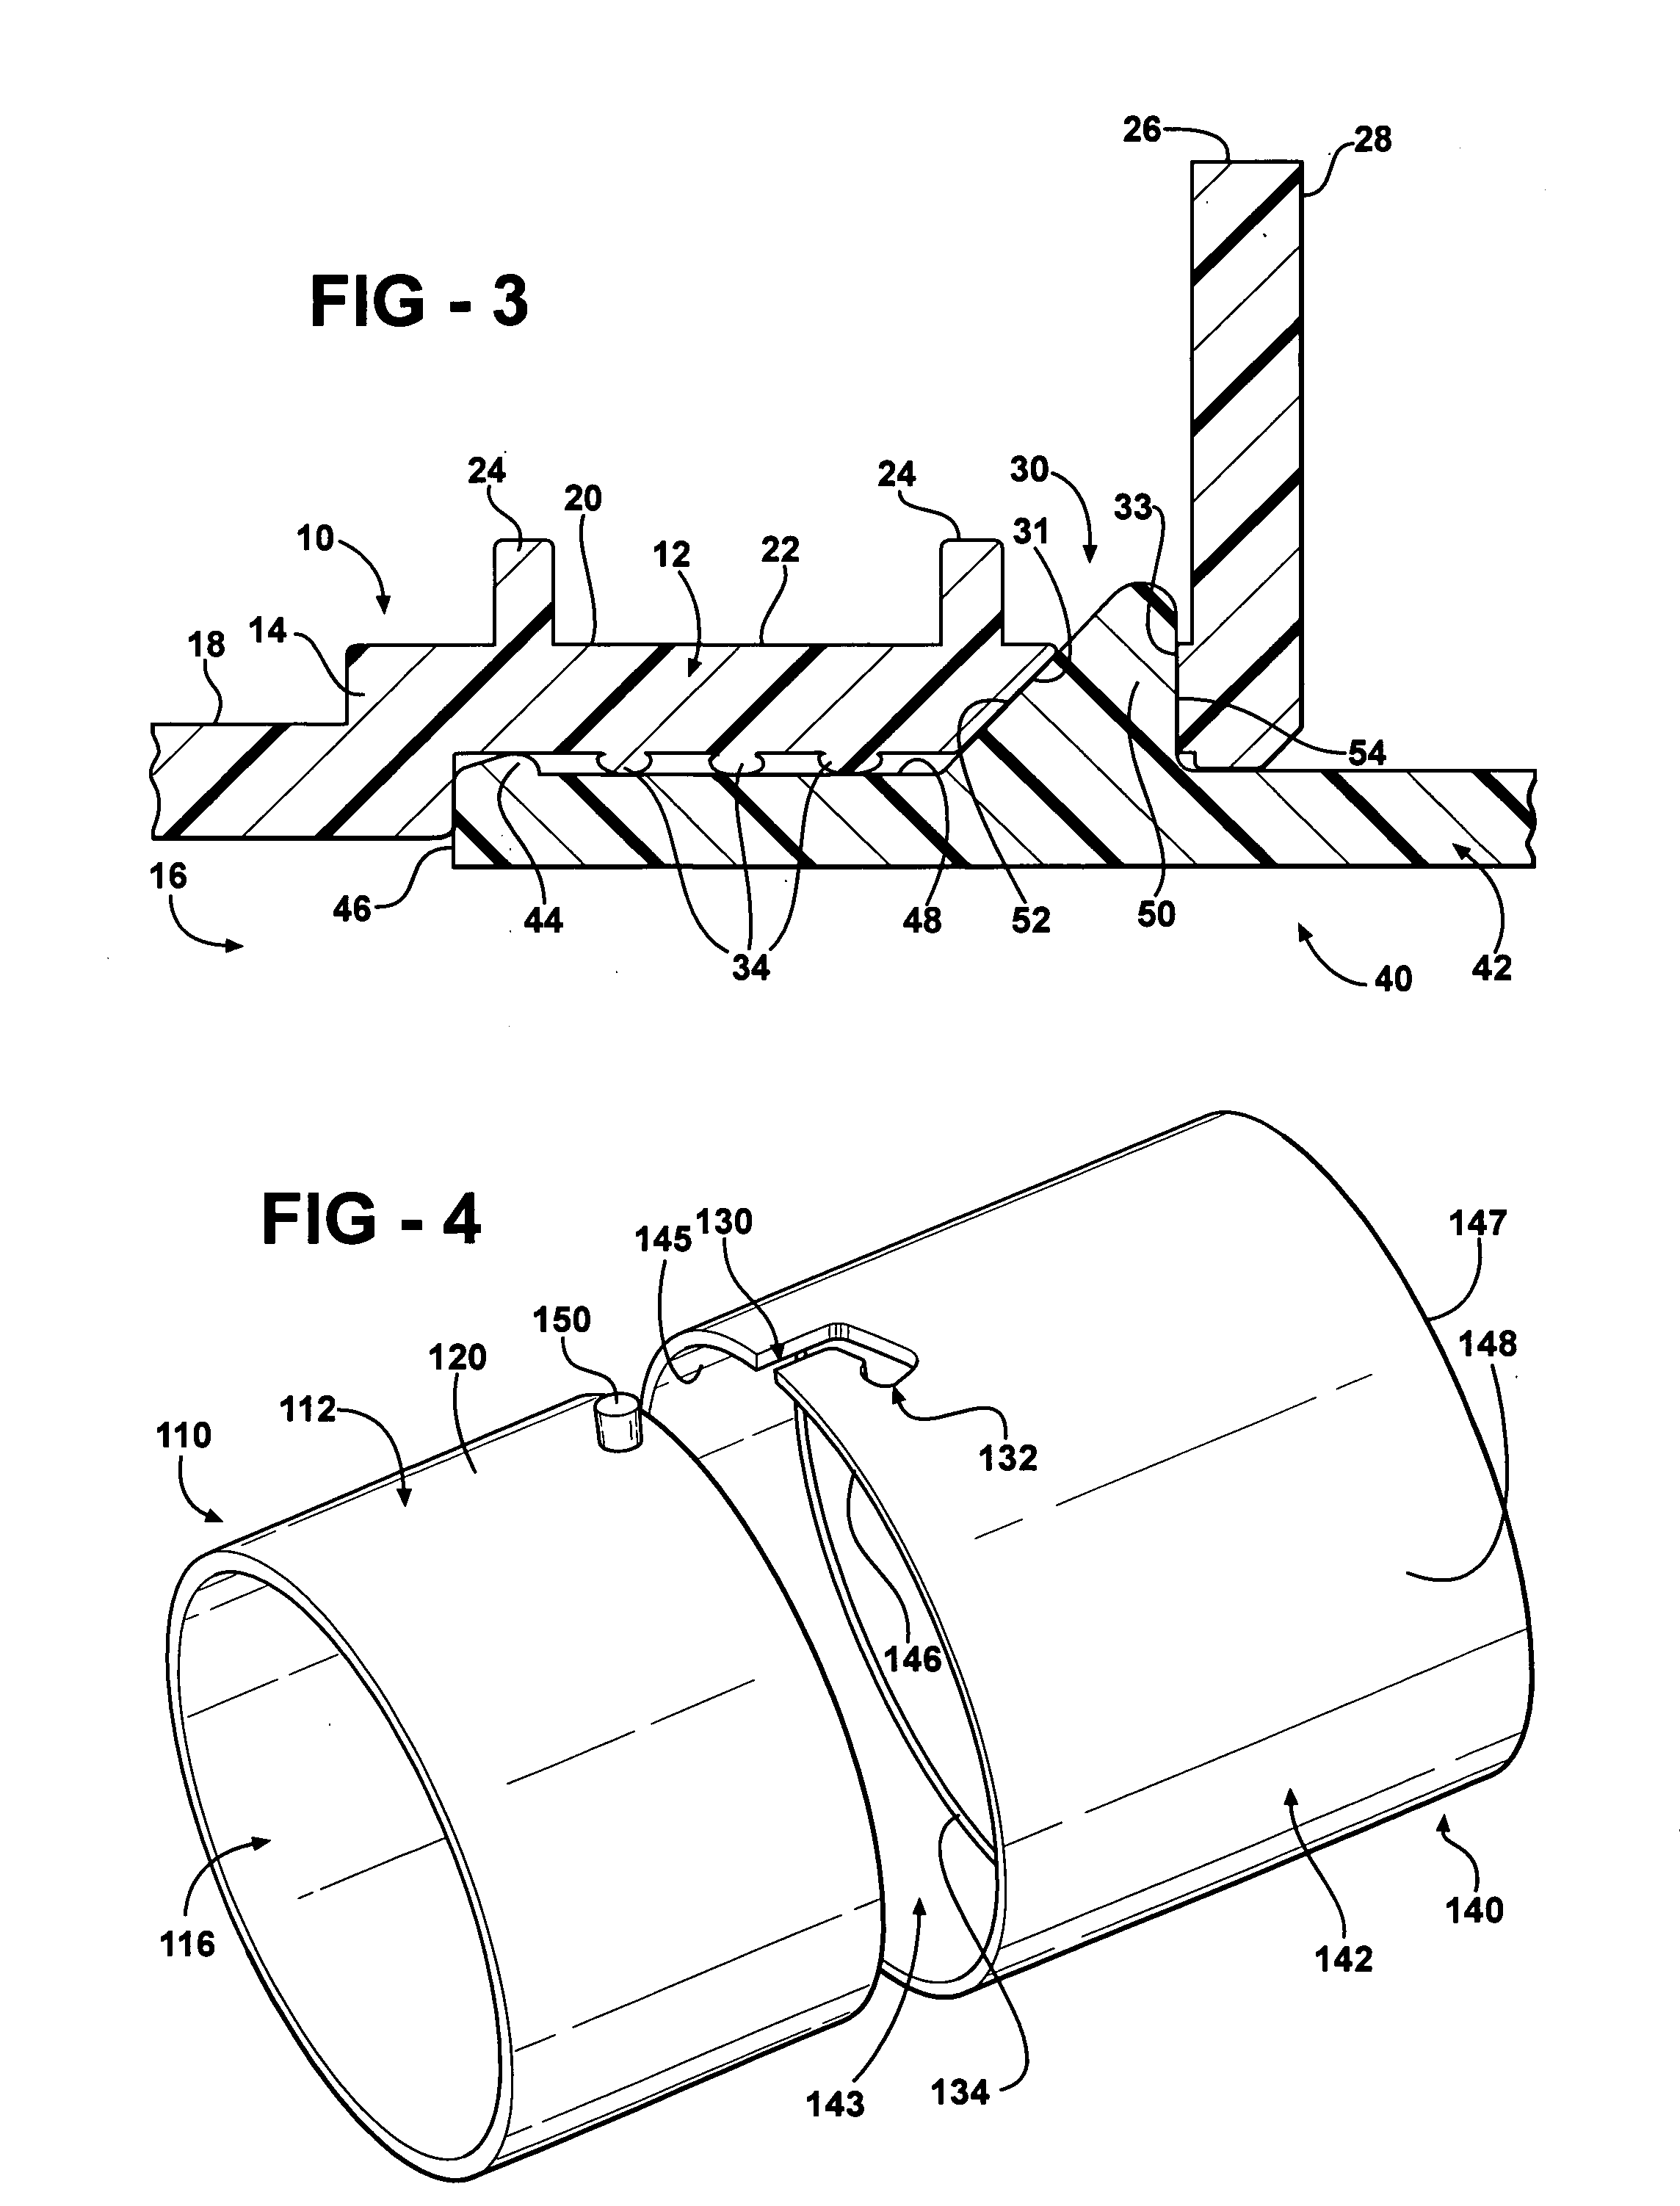 Clampless tube connection with integrated sealing and locking feature